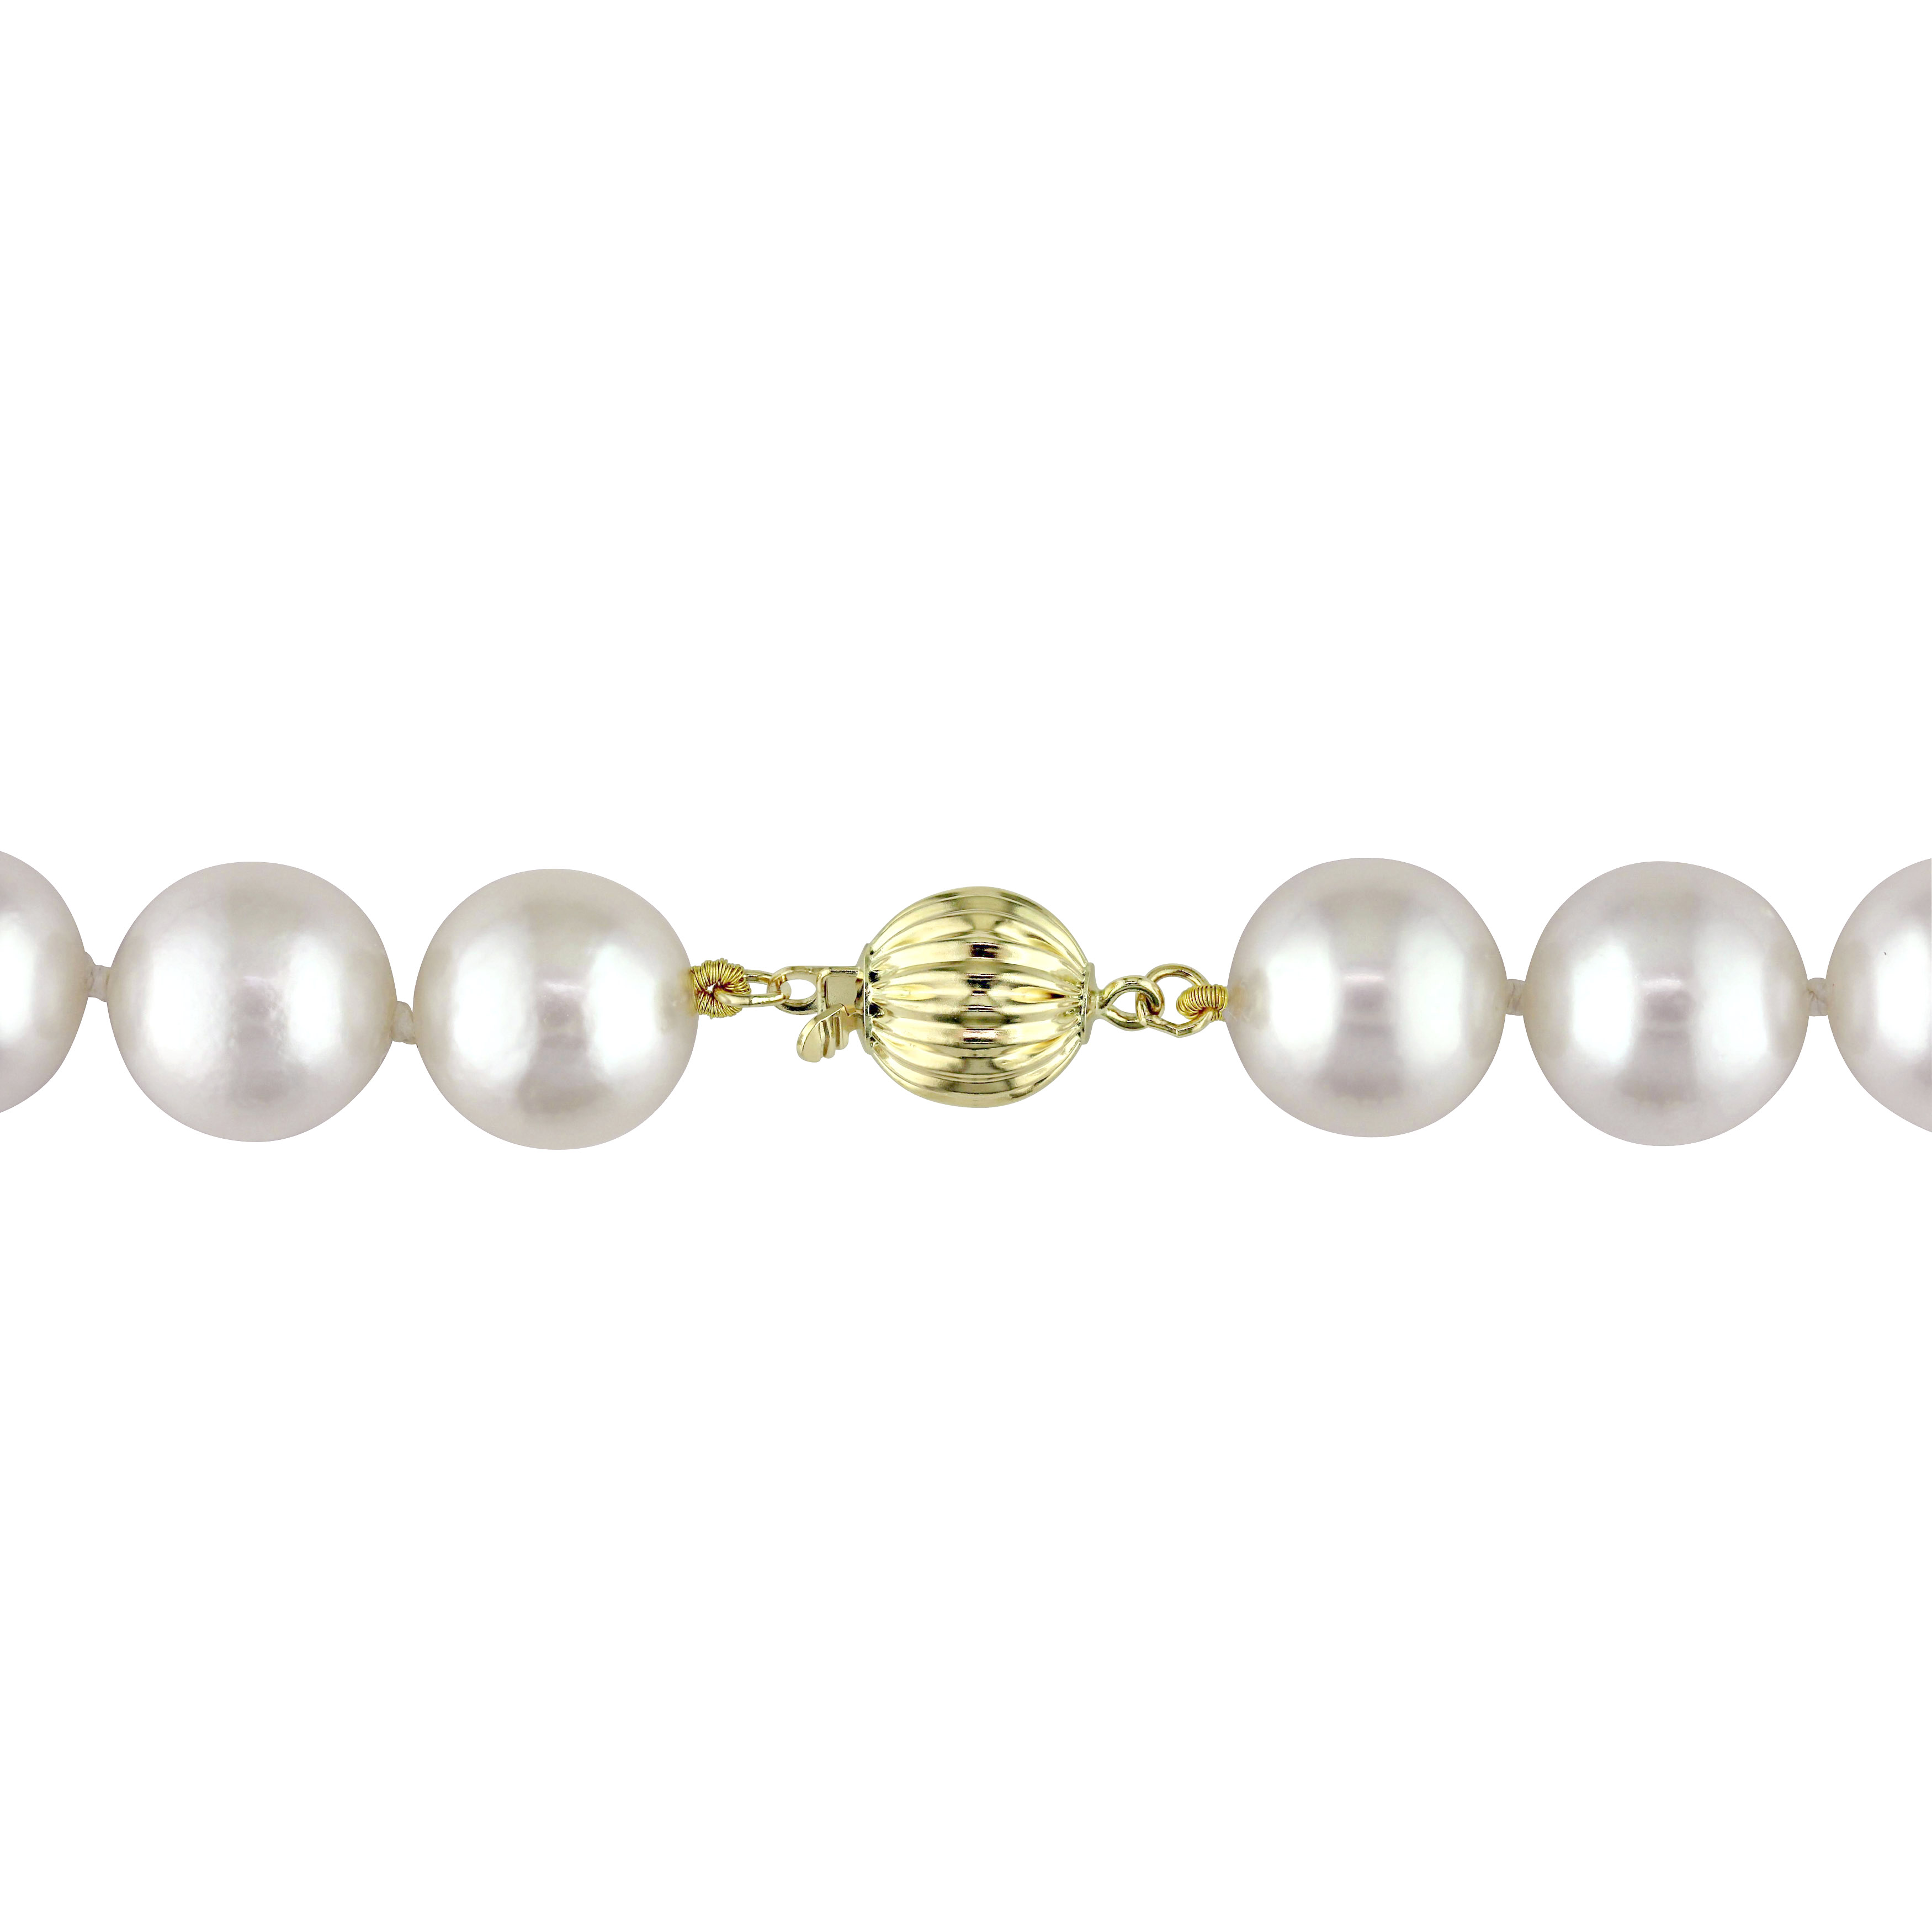 9-11 MM South Sea Pearl Graduated Strand Necklace with 14k Yellow Gold Ball Clasp - 18 in